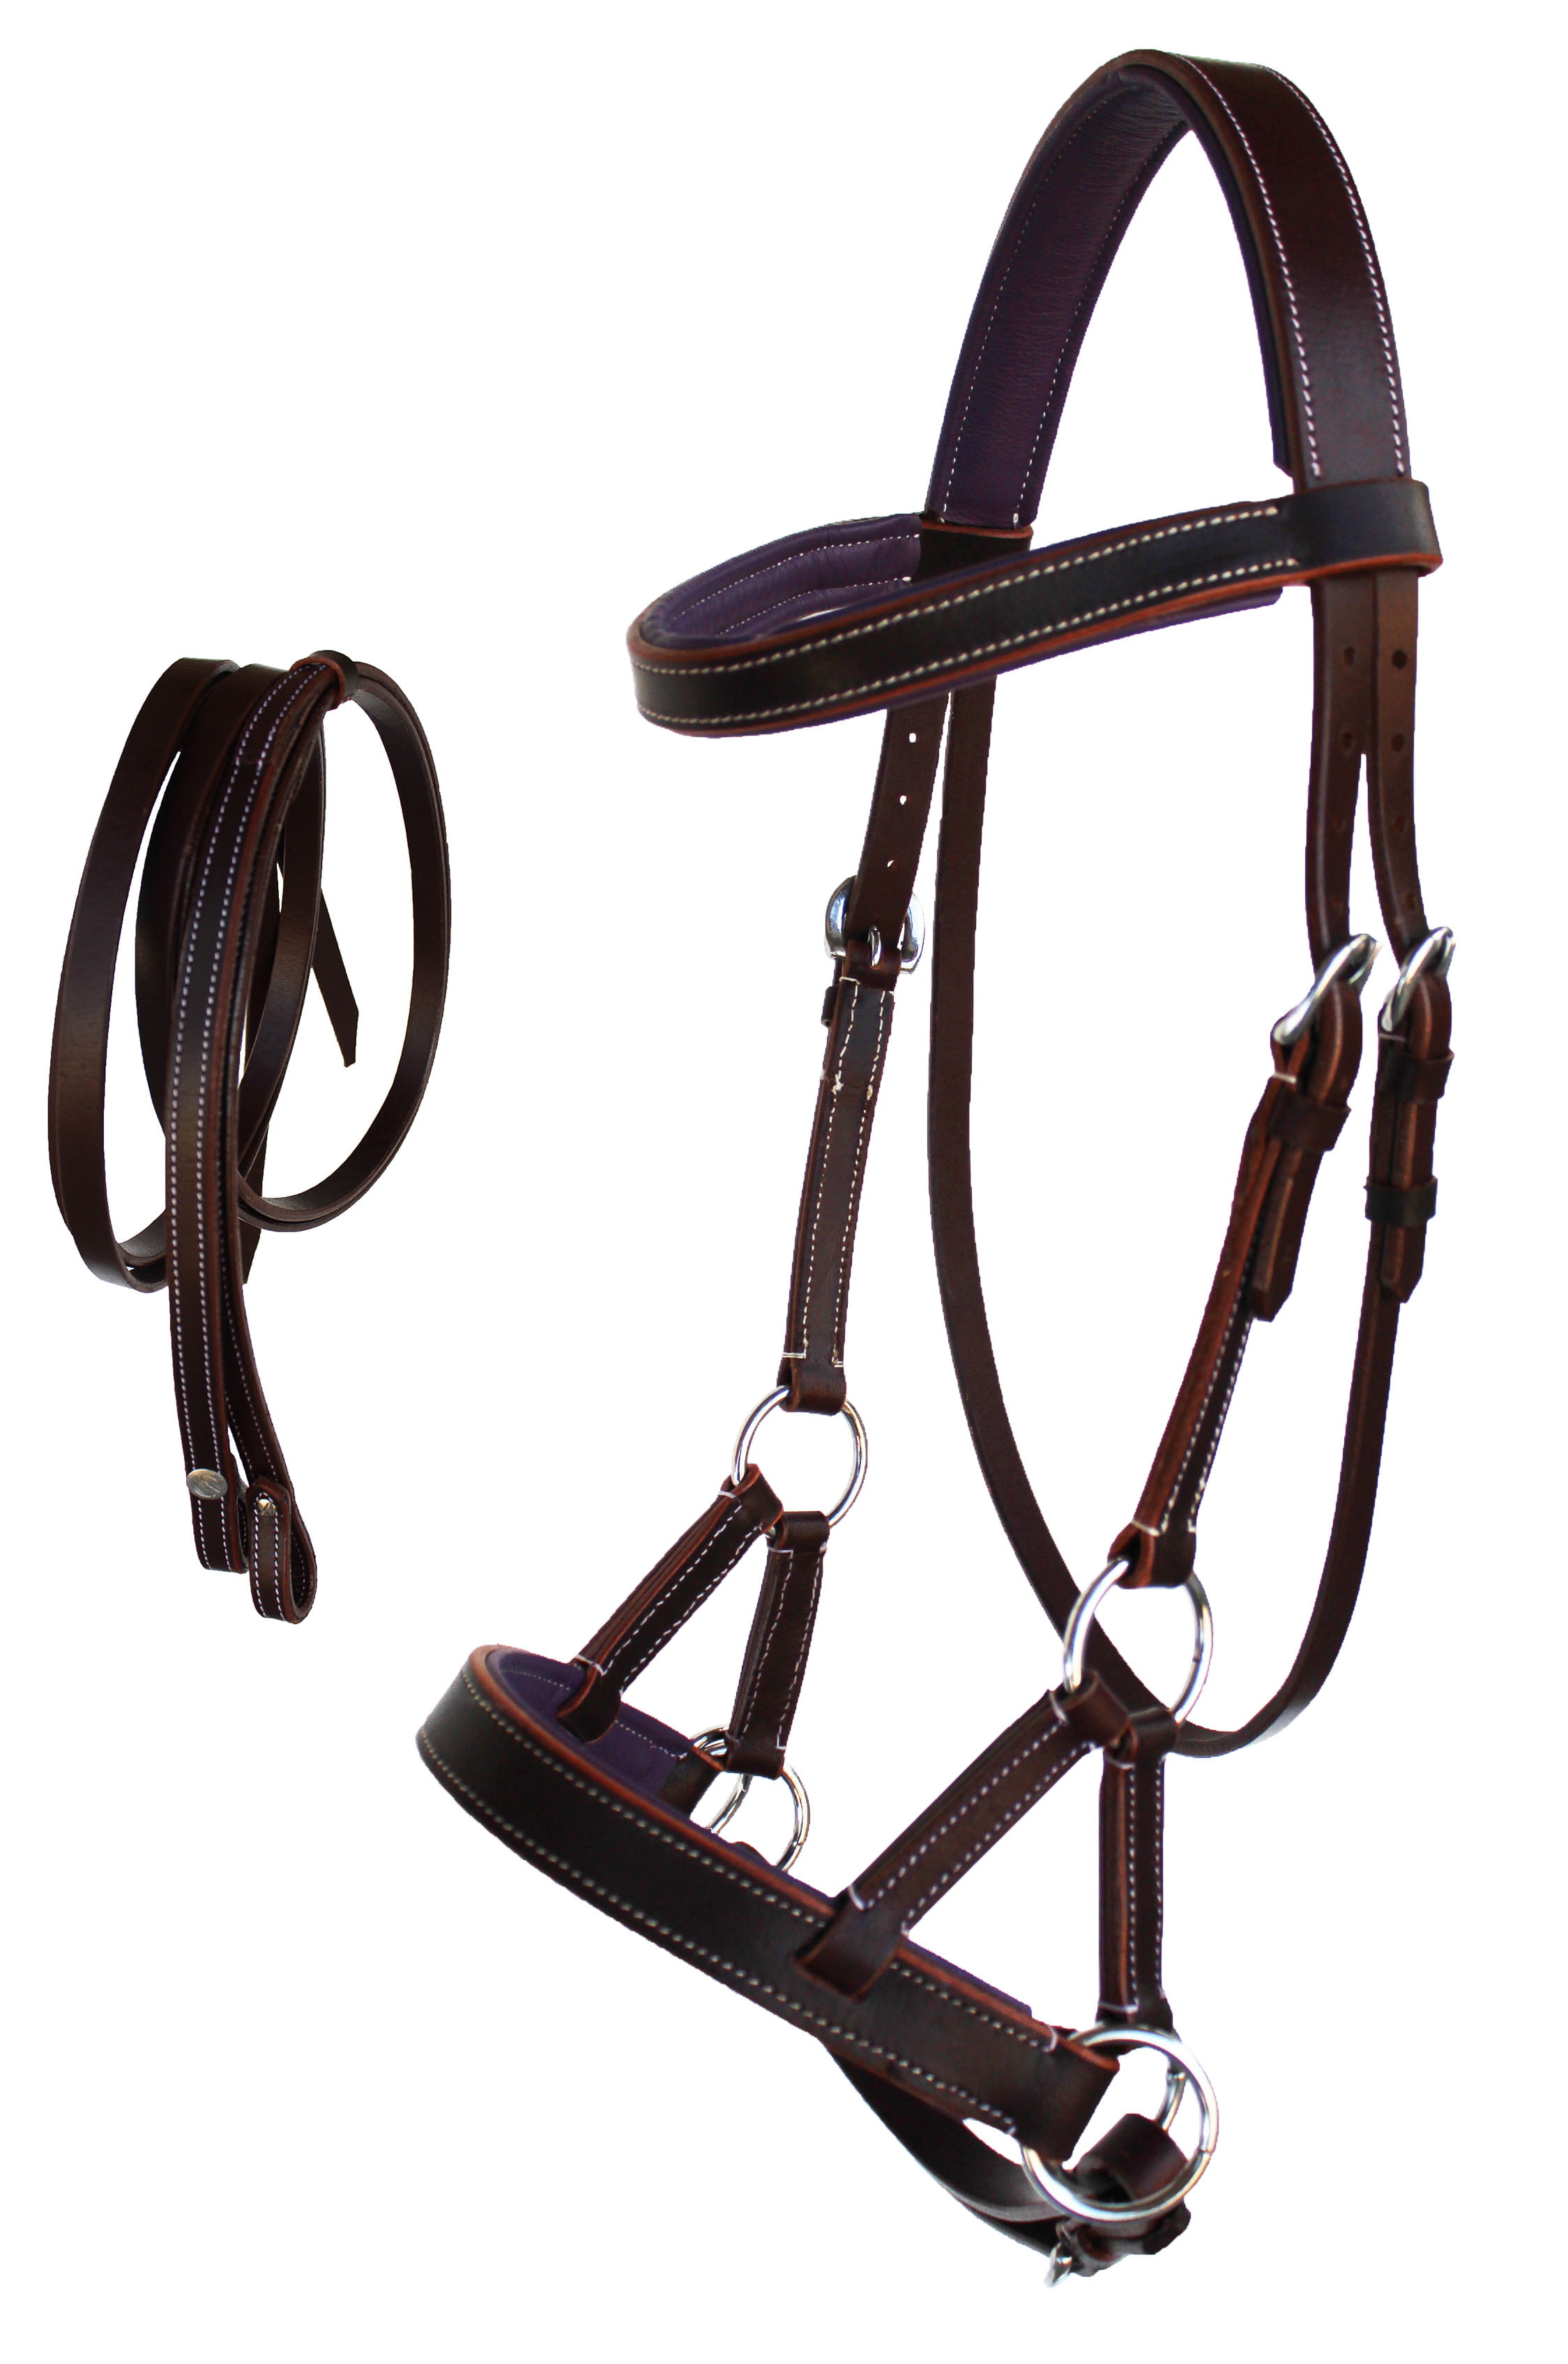 Equestrian Leather Super sure Grip Reins for bridle in black or brown cob,full 